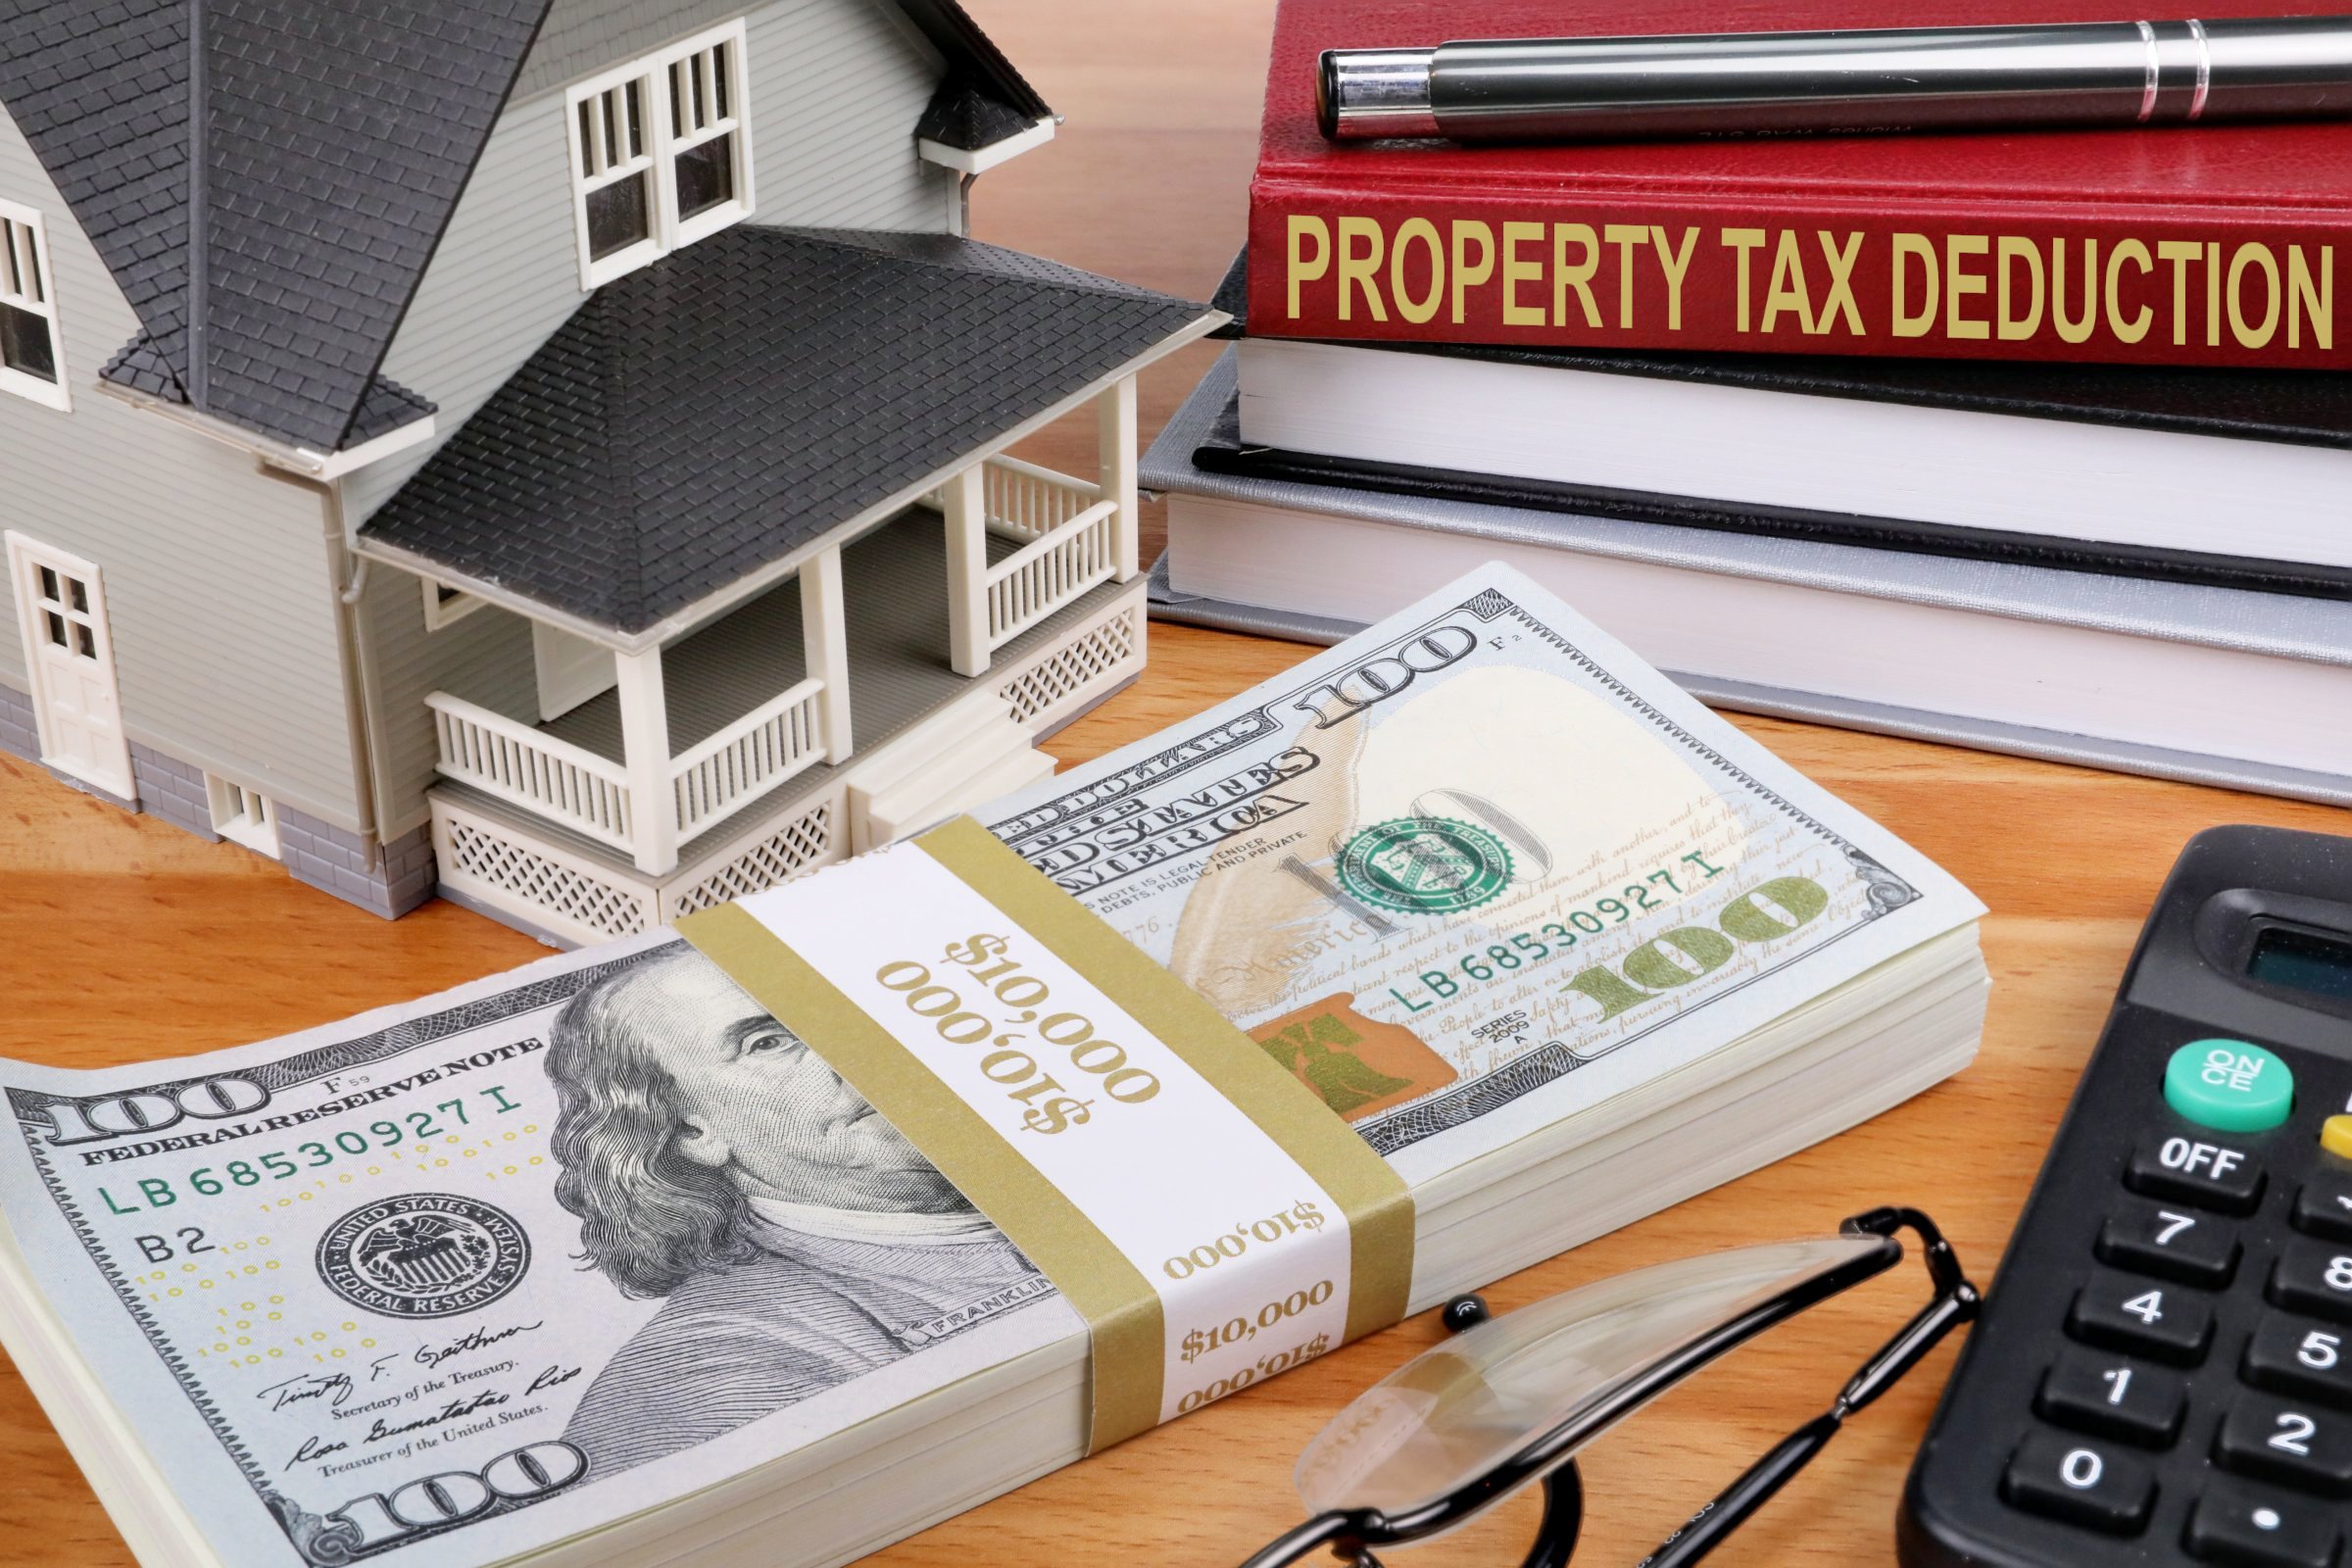 free-of-charge-creative-commons-property-tax-deduction-image-real